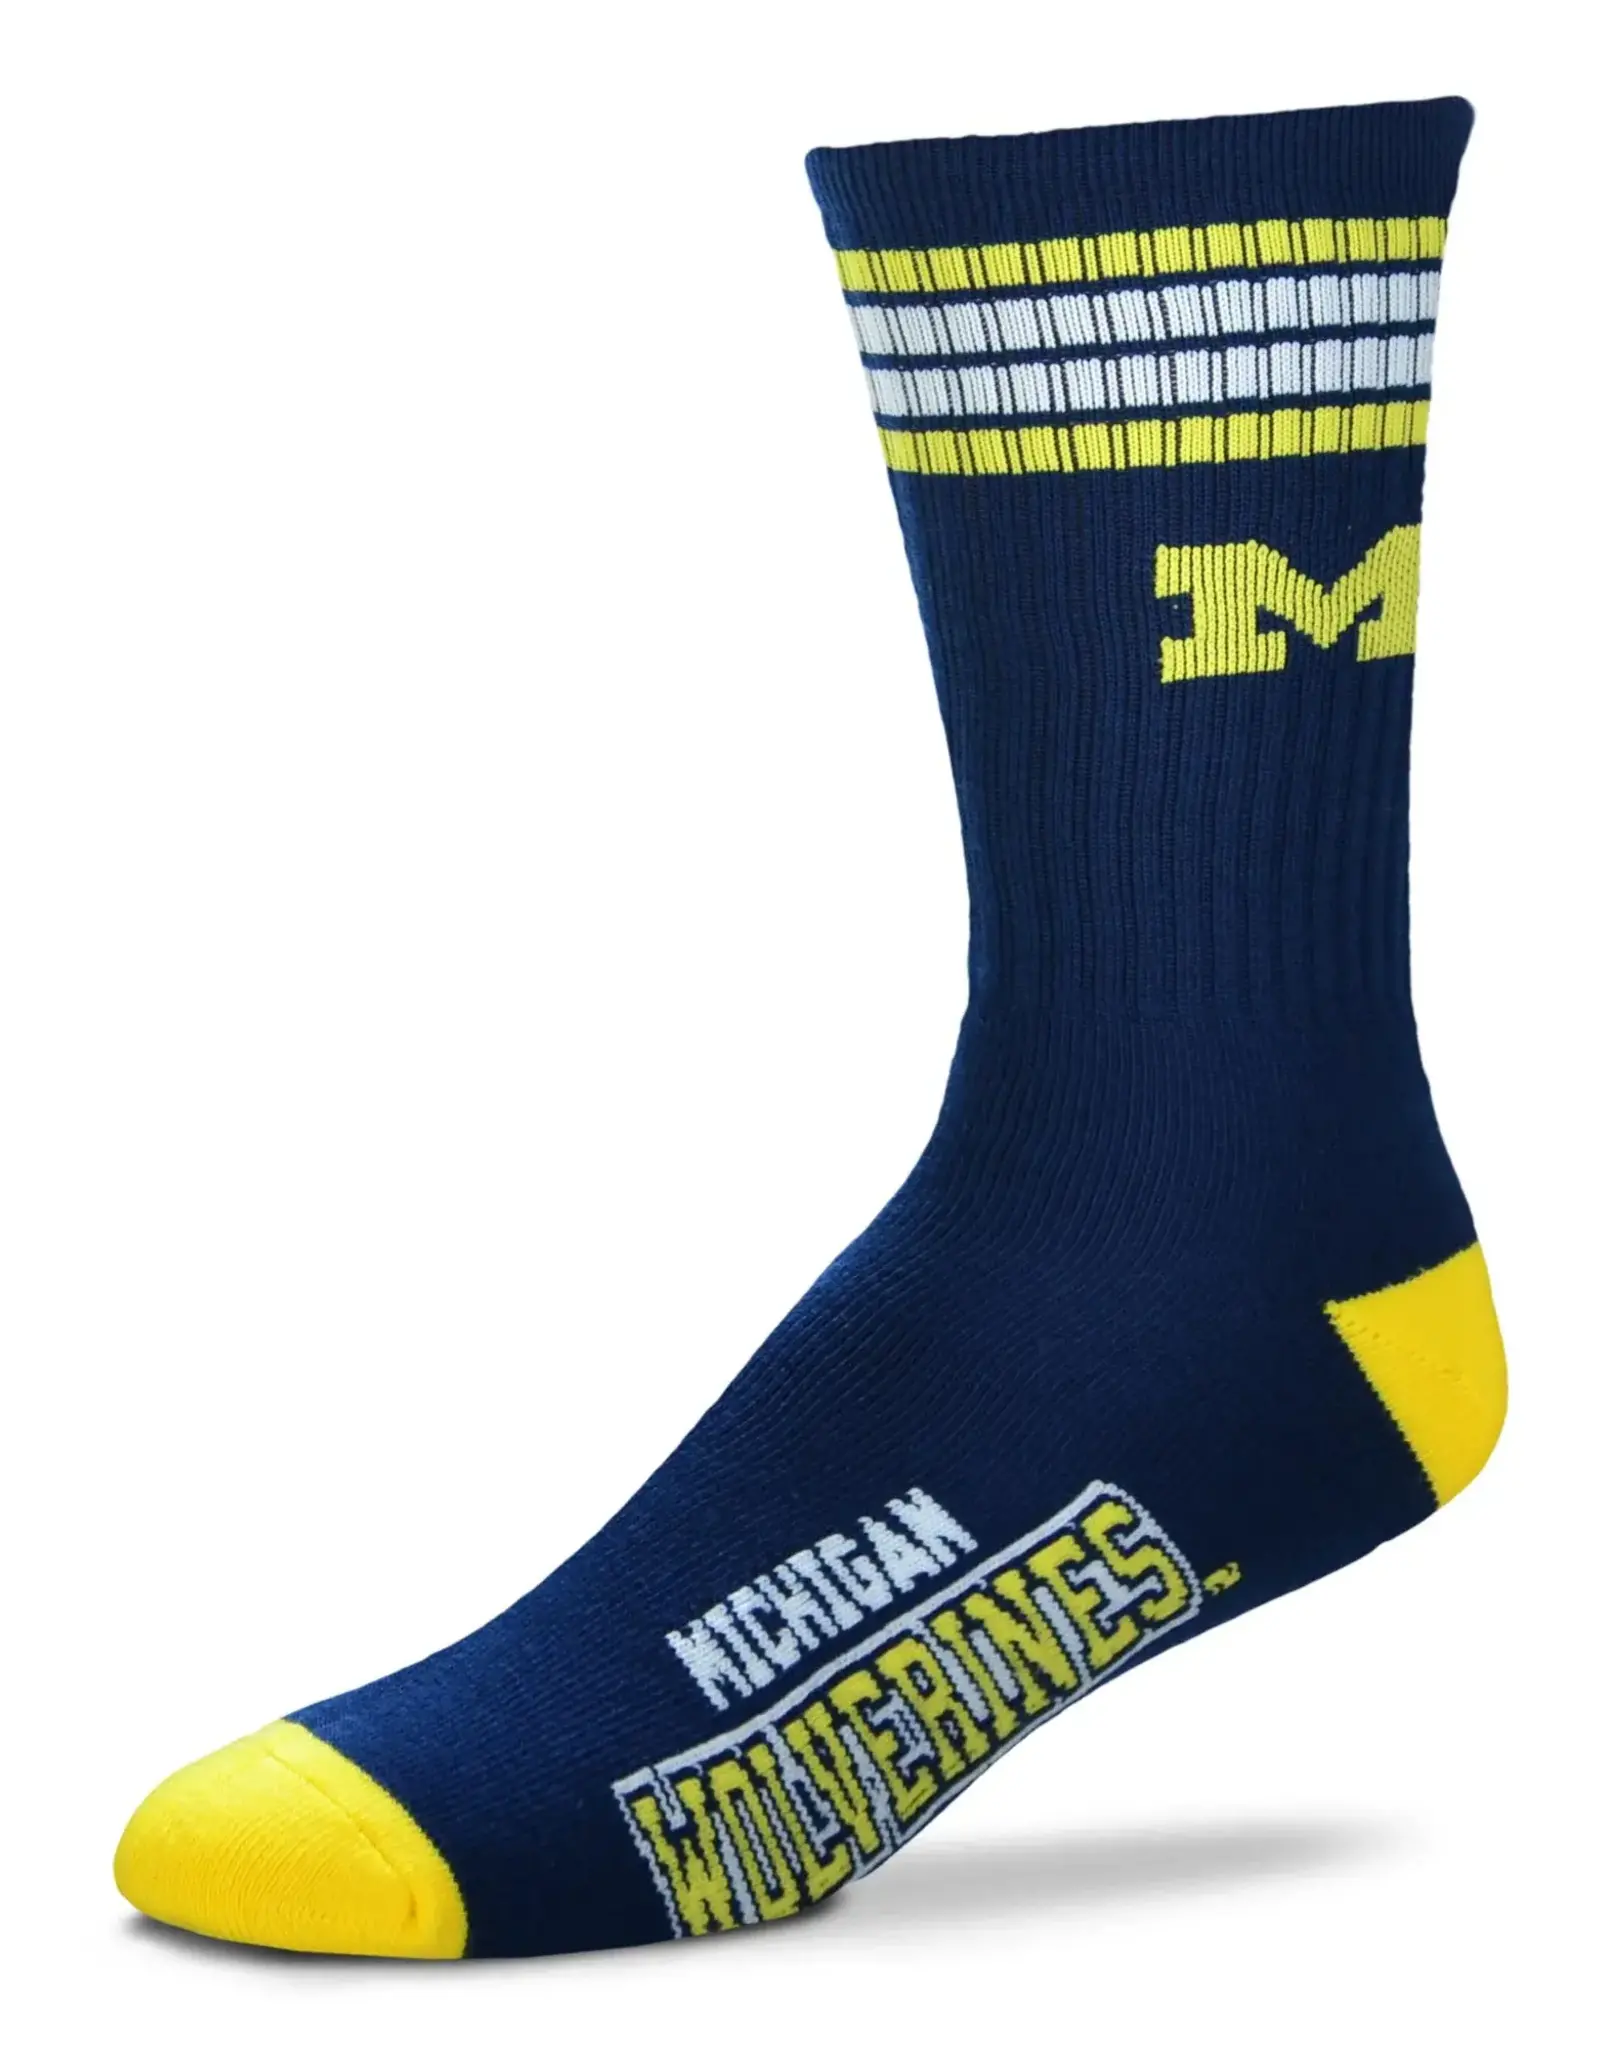 For Bare Feet Michigan Wolverines Youth Deuce Socks